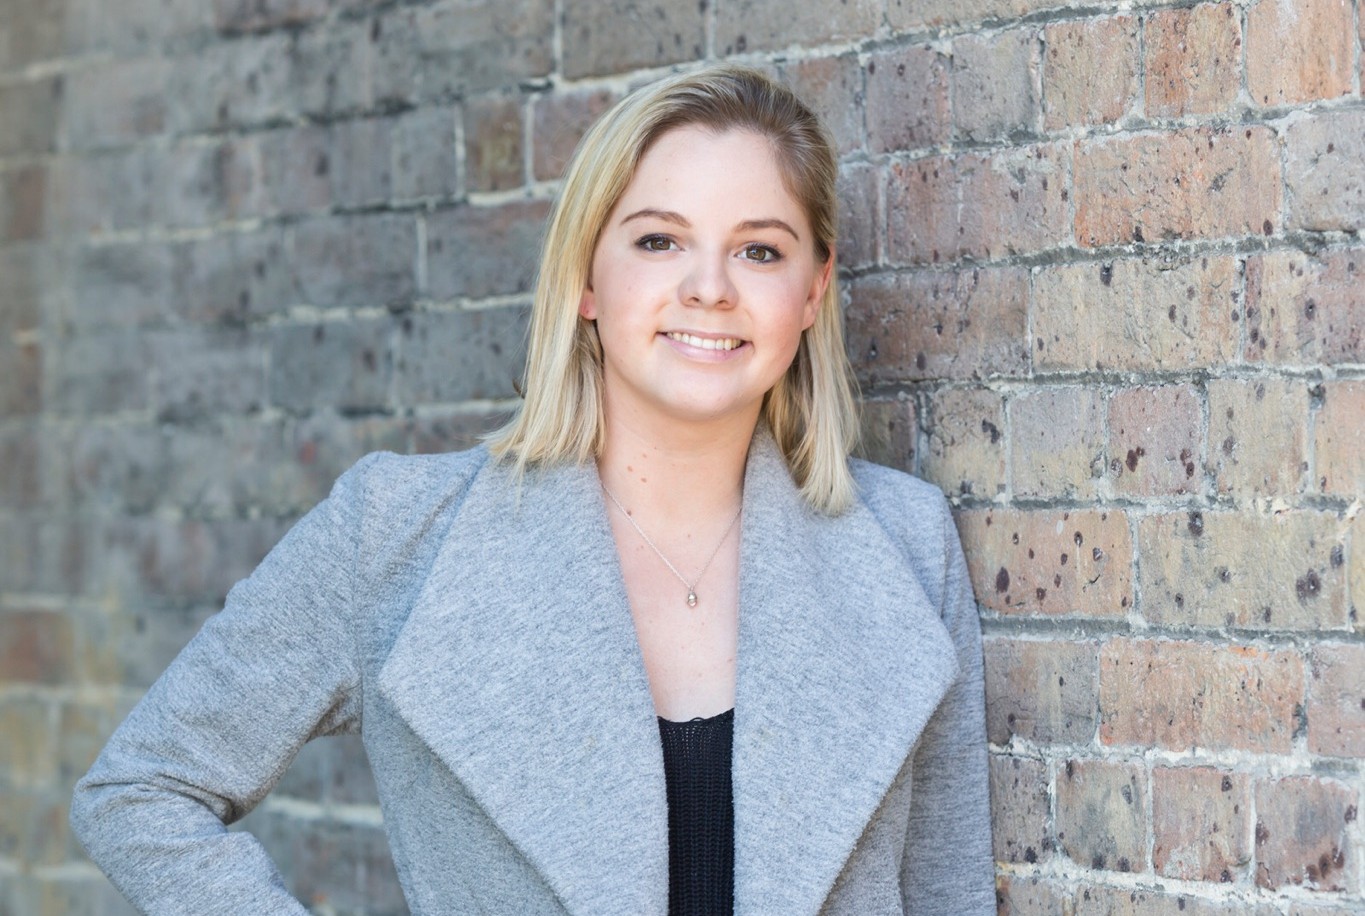 A day in the life of a PR account executive at Tonic PR